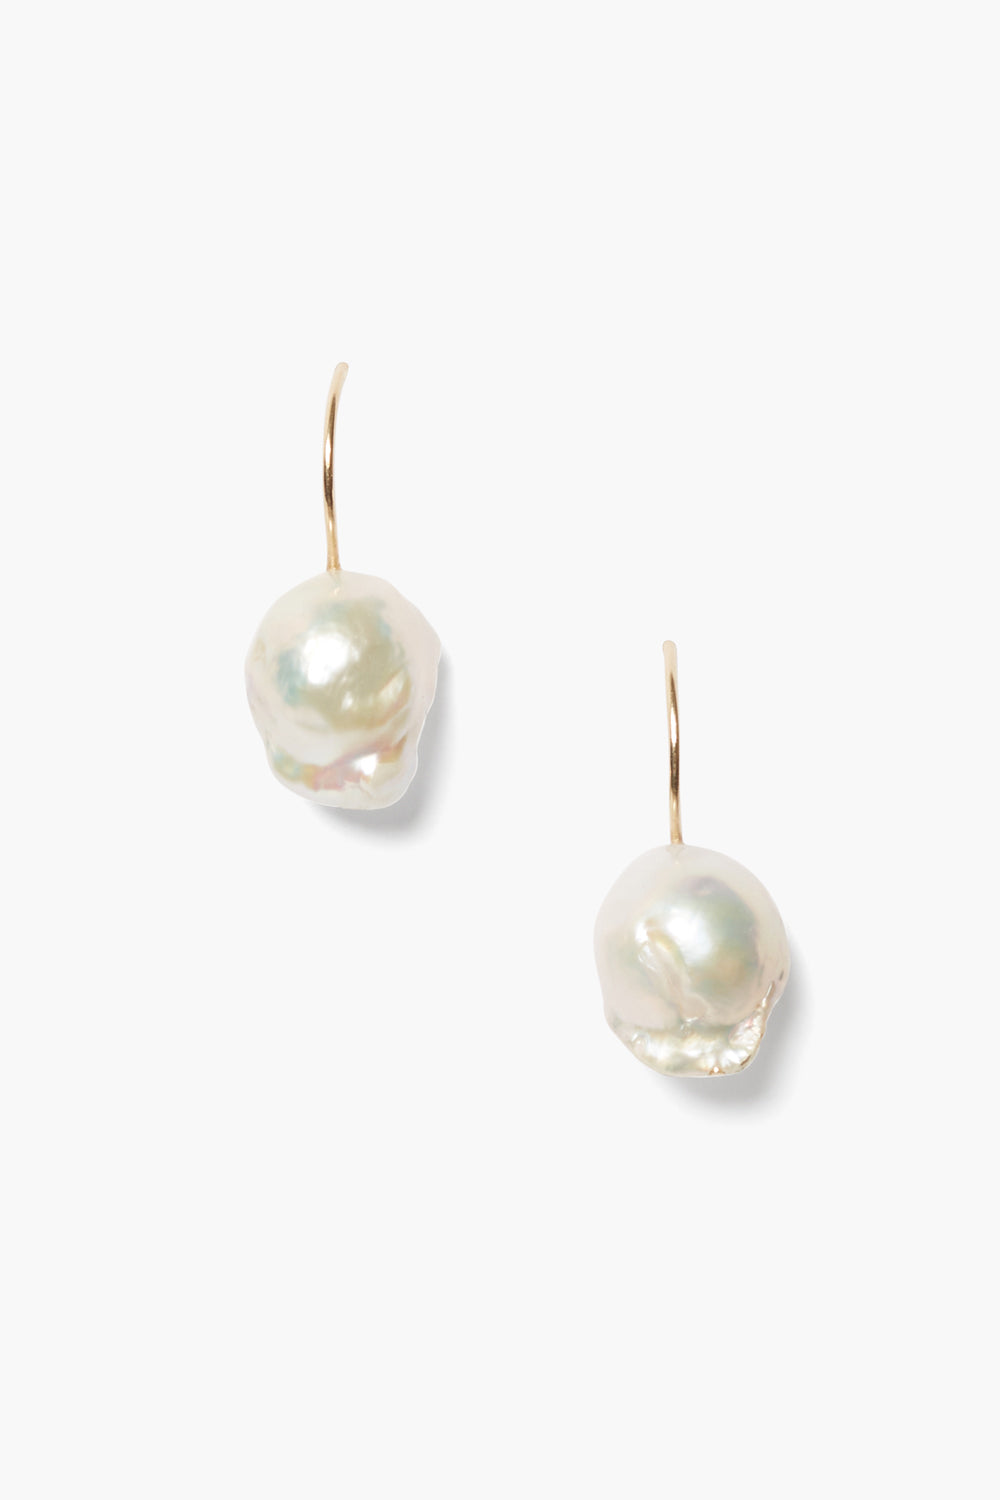 White Baroque Pearl on Leather Cord Necklace – Chan Luu